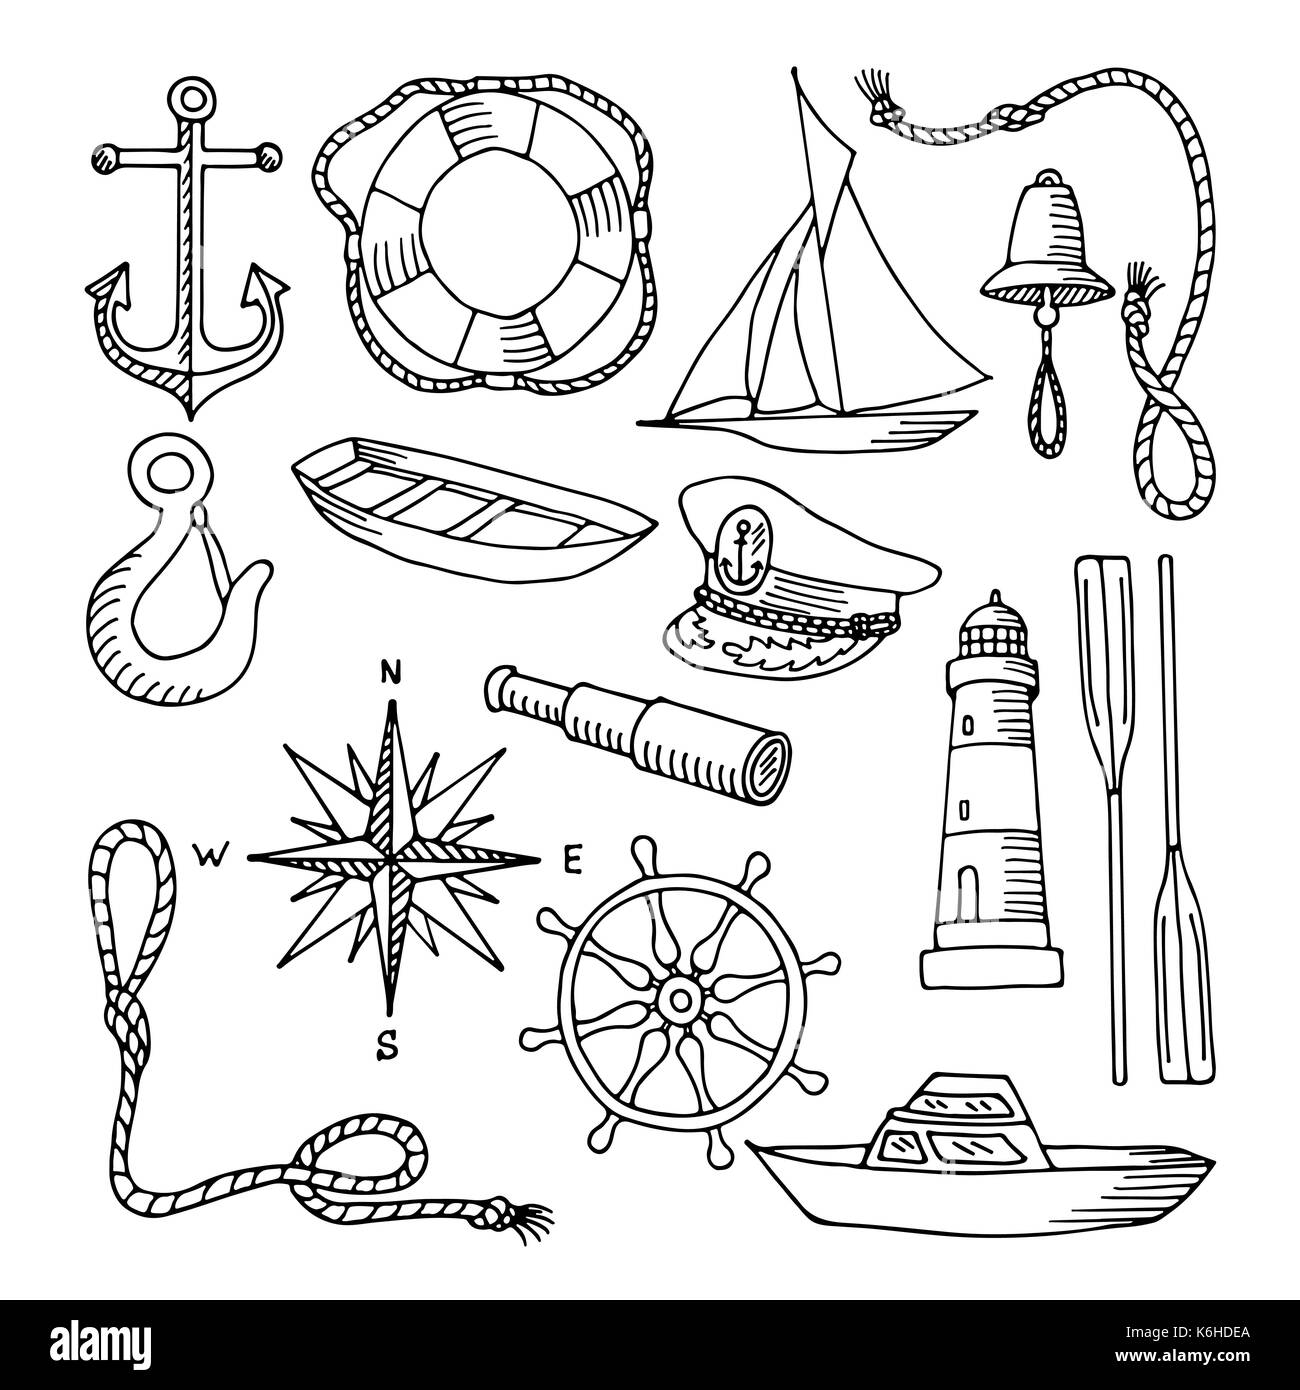 Set of vector images on the sea theme Stock Vector